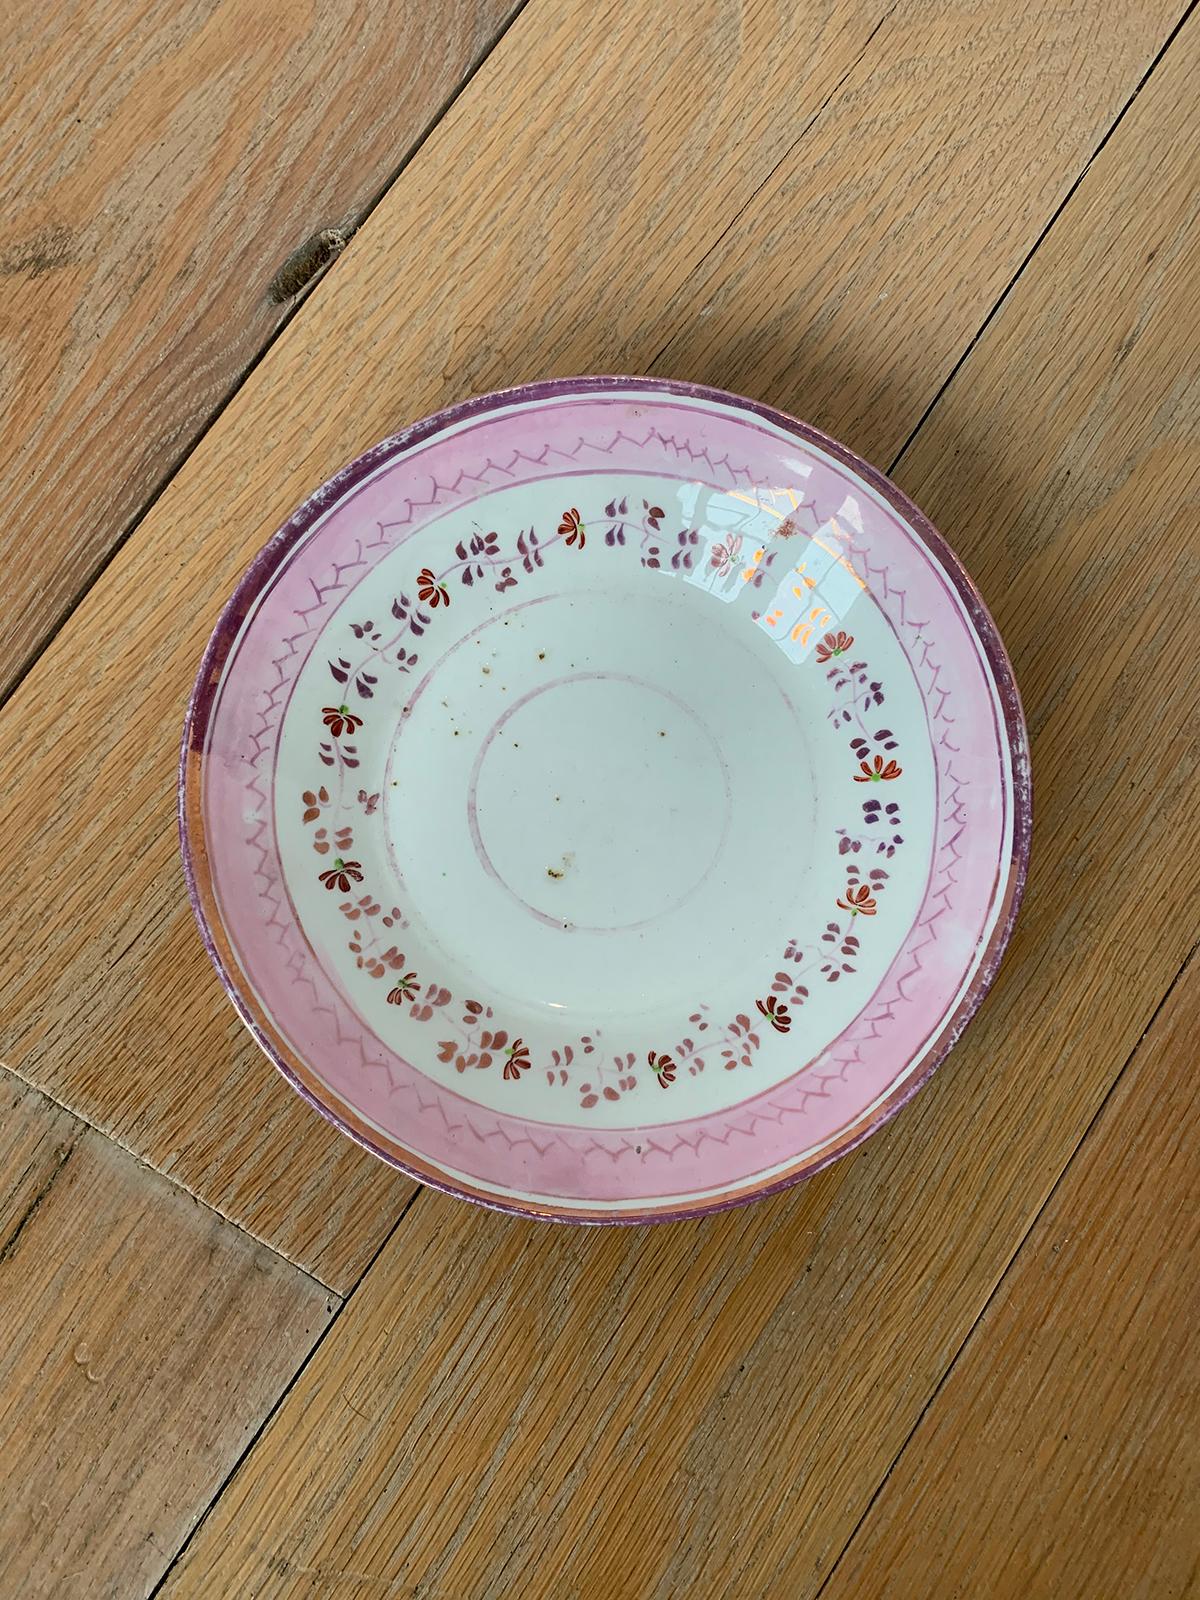 19th century circa 1830s English pink floral lusterware round porcelain plate, unmarked.